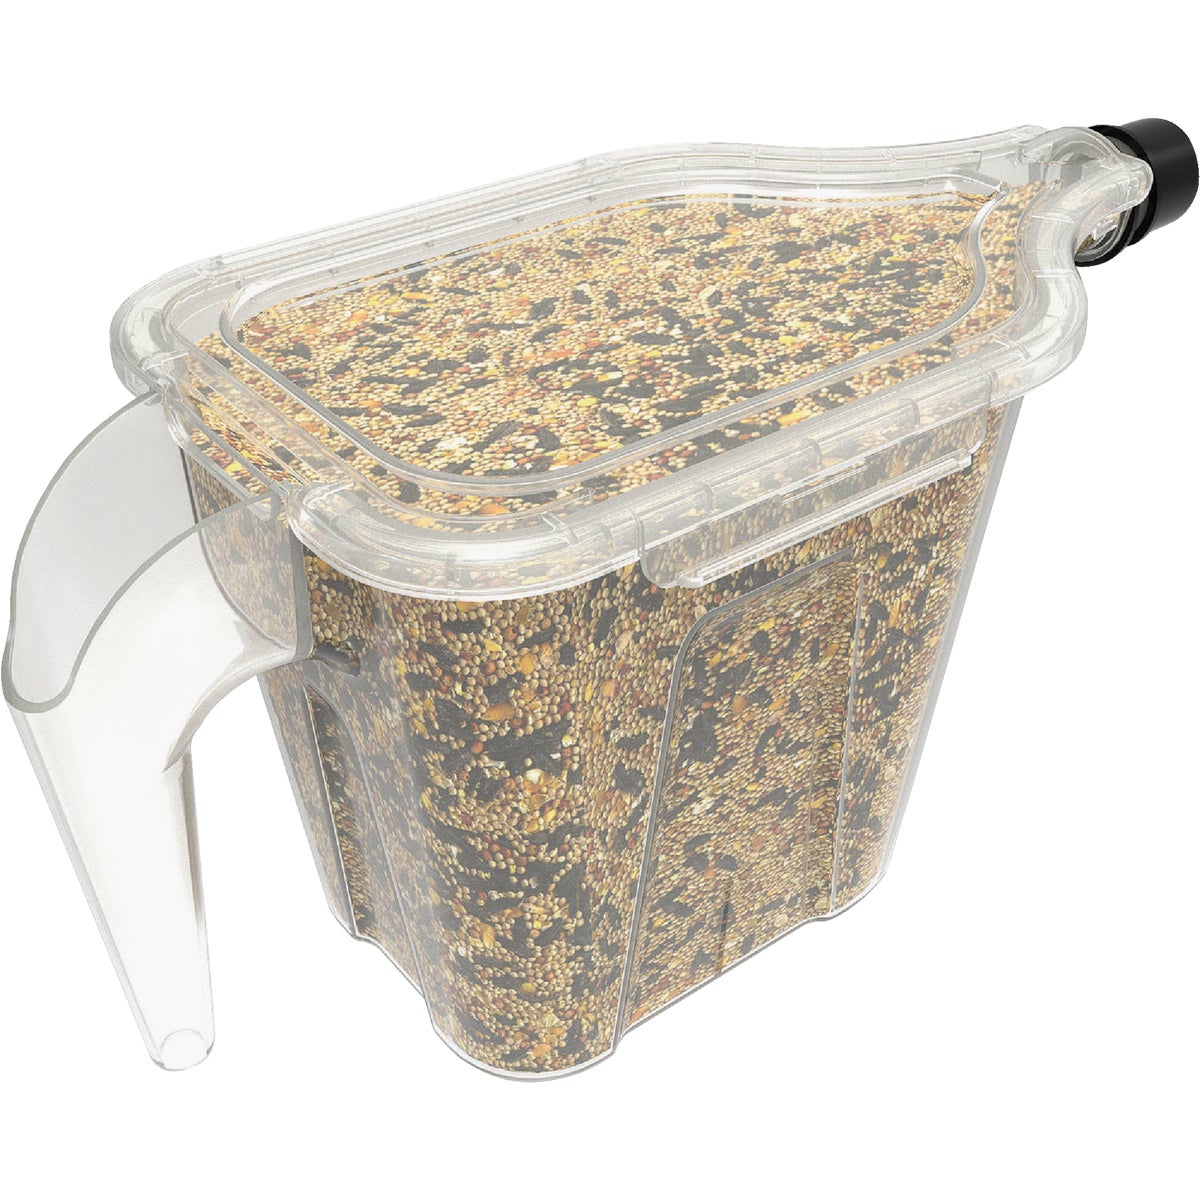 Item 704499, No Spill 3-in-1 super tote carries, pours, and stores up to 5 Lb.